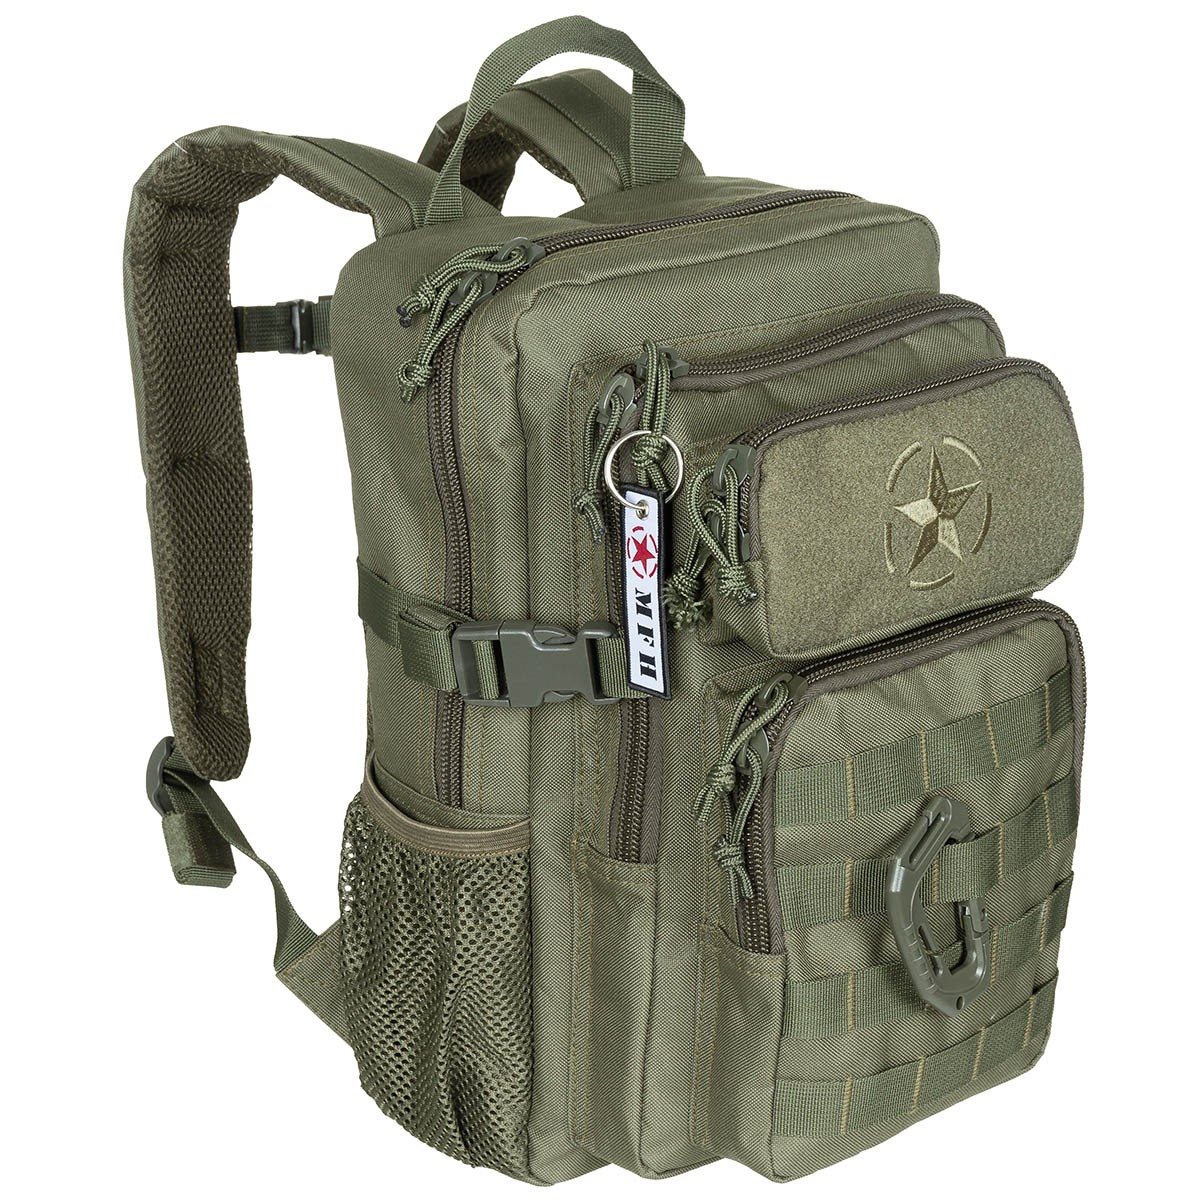 Backpack US ASSAULT YOUNGSTER OLIVE DRAB MFH Defence 30330B L-11